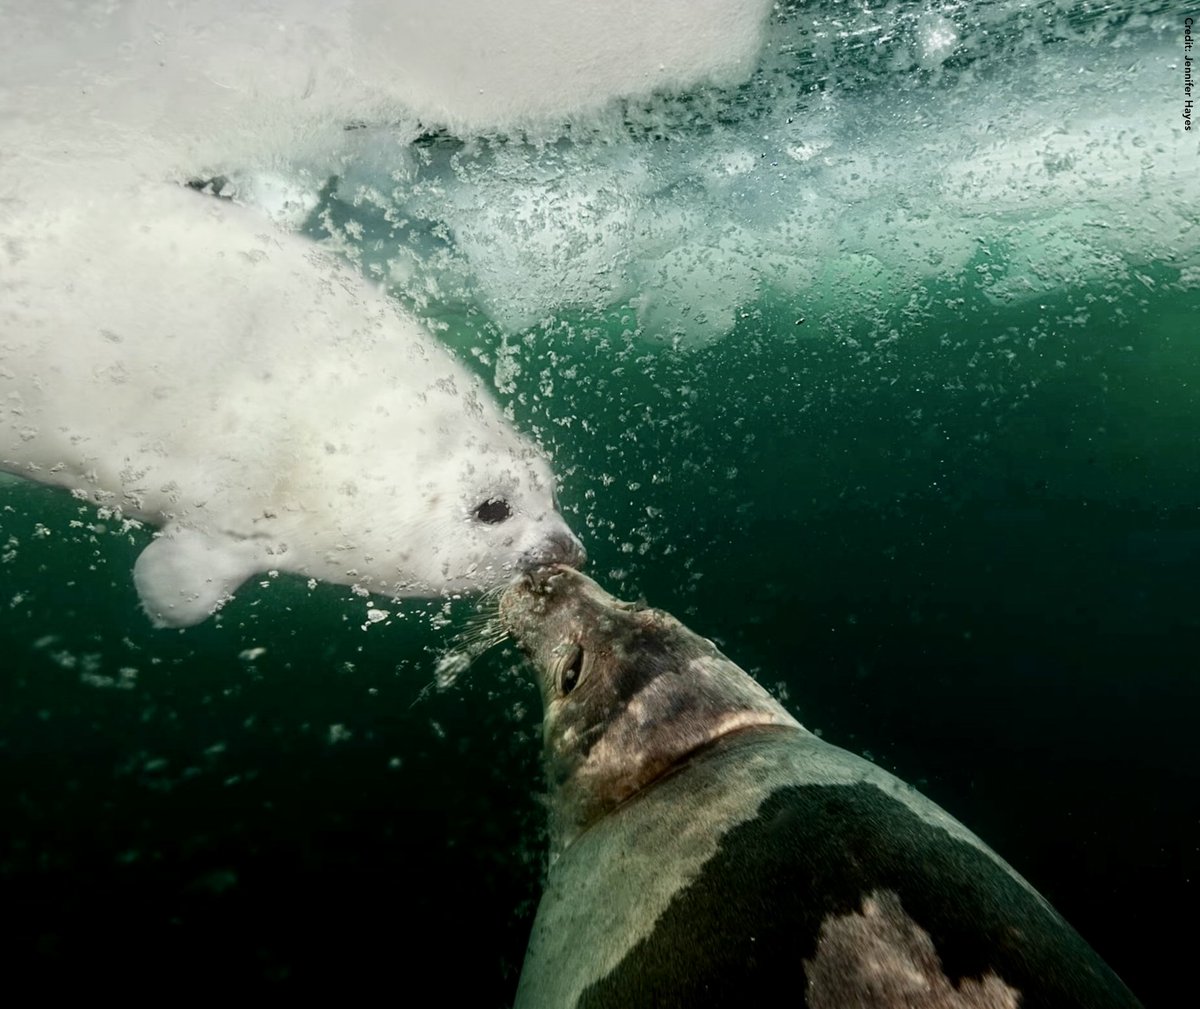 #ClimateCrisis The last kiss. Gulf of St Lawrence winters are warming twice as fast as summers - bad ice years increasingly frequent. Thin ice & storms plunge fluffy harp seal pups into freezing water & thousands can die, tragedies unseen by humans in their bubbles of denial.